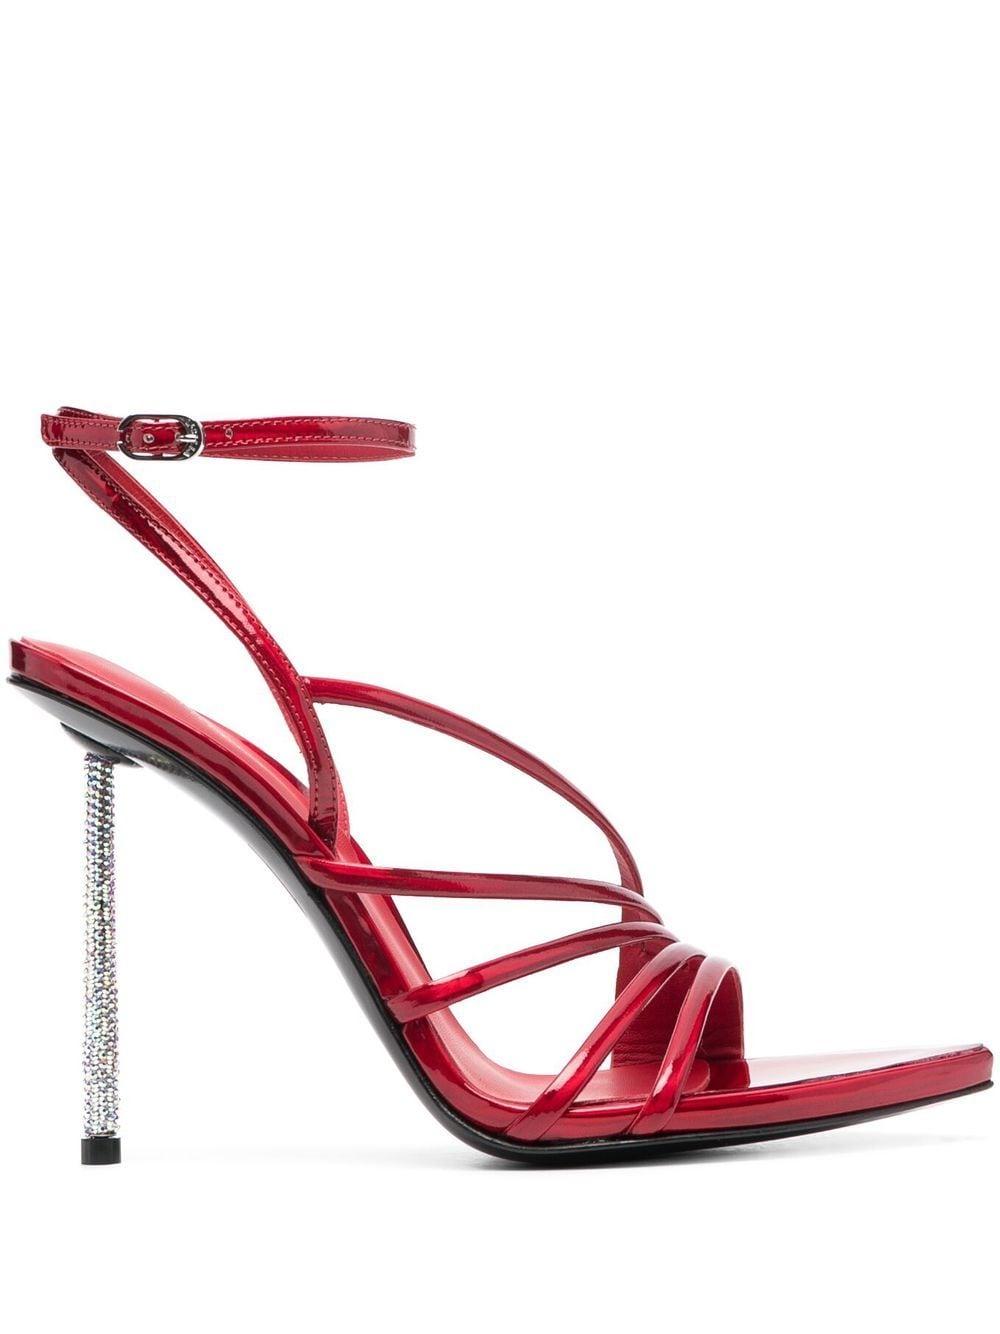 Le Silla Bella 120mm Patent-leather Sandals in Pink | Lyst